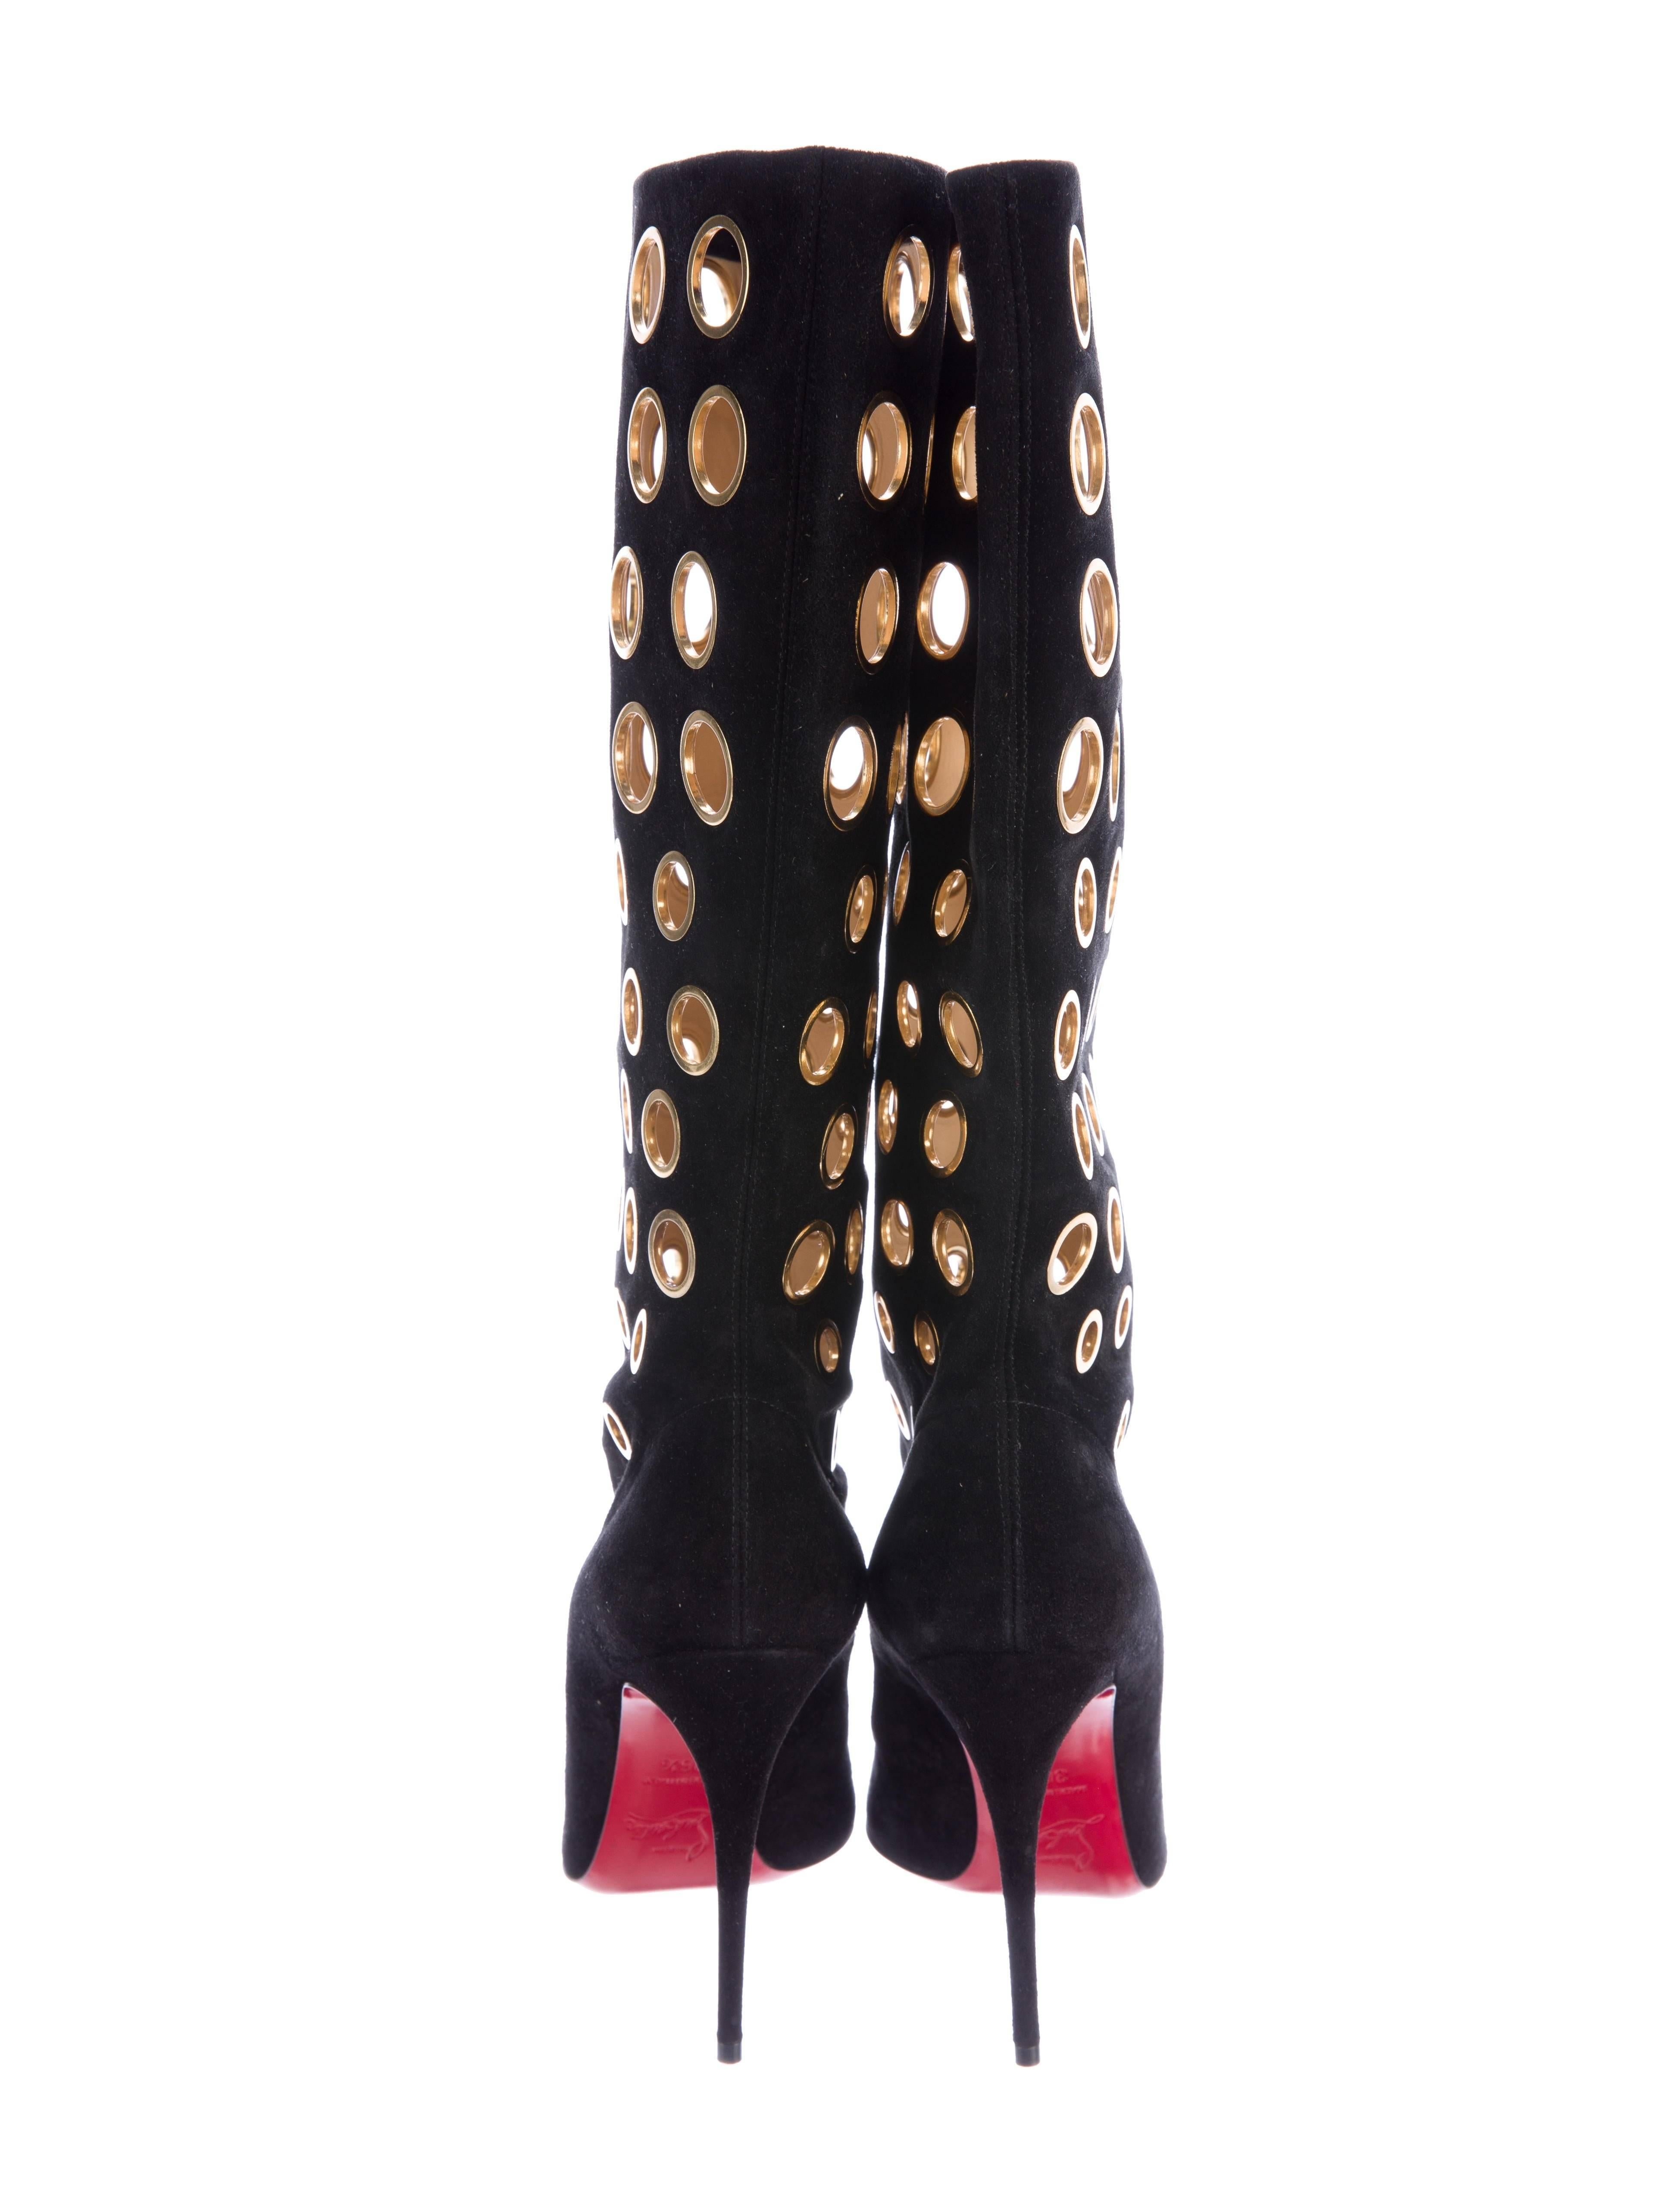 Women's Christian Louboutin New Black Suede Gold Cut Out Knee High Heels Boots in Box